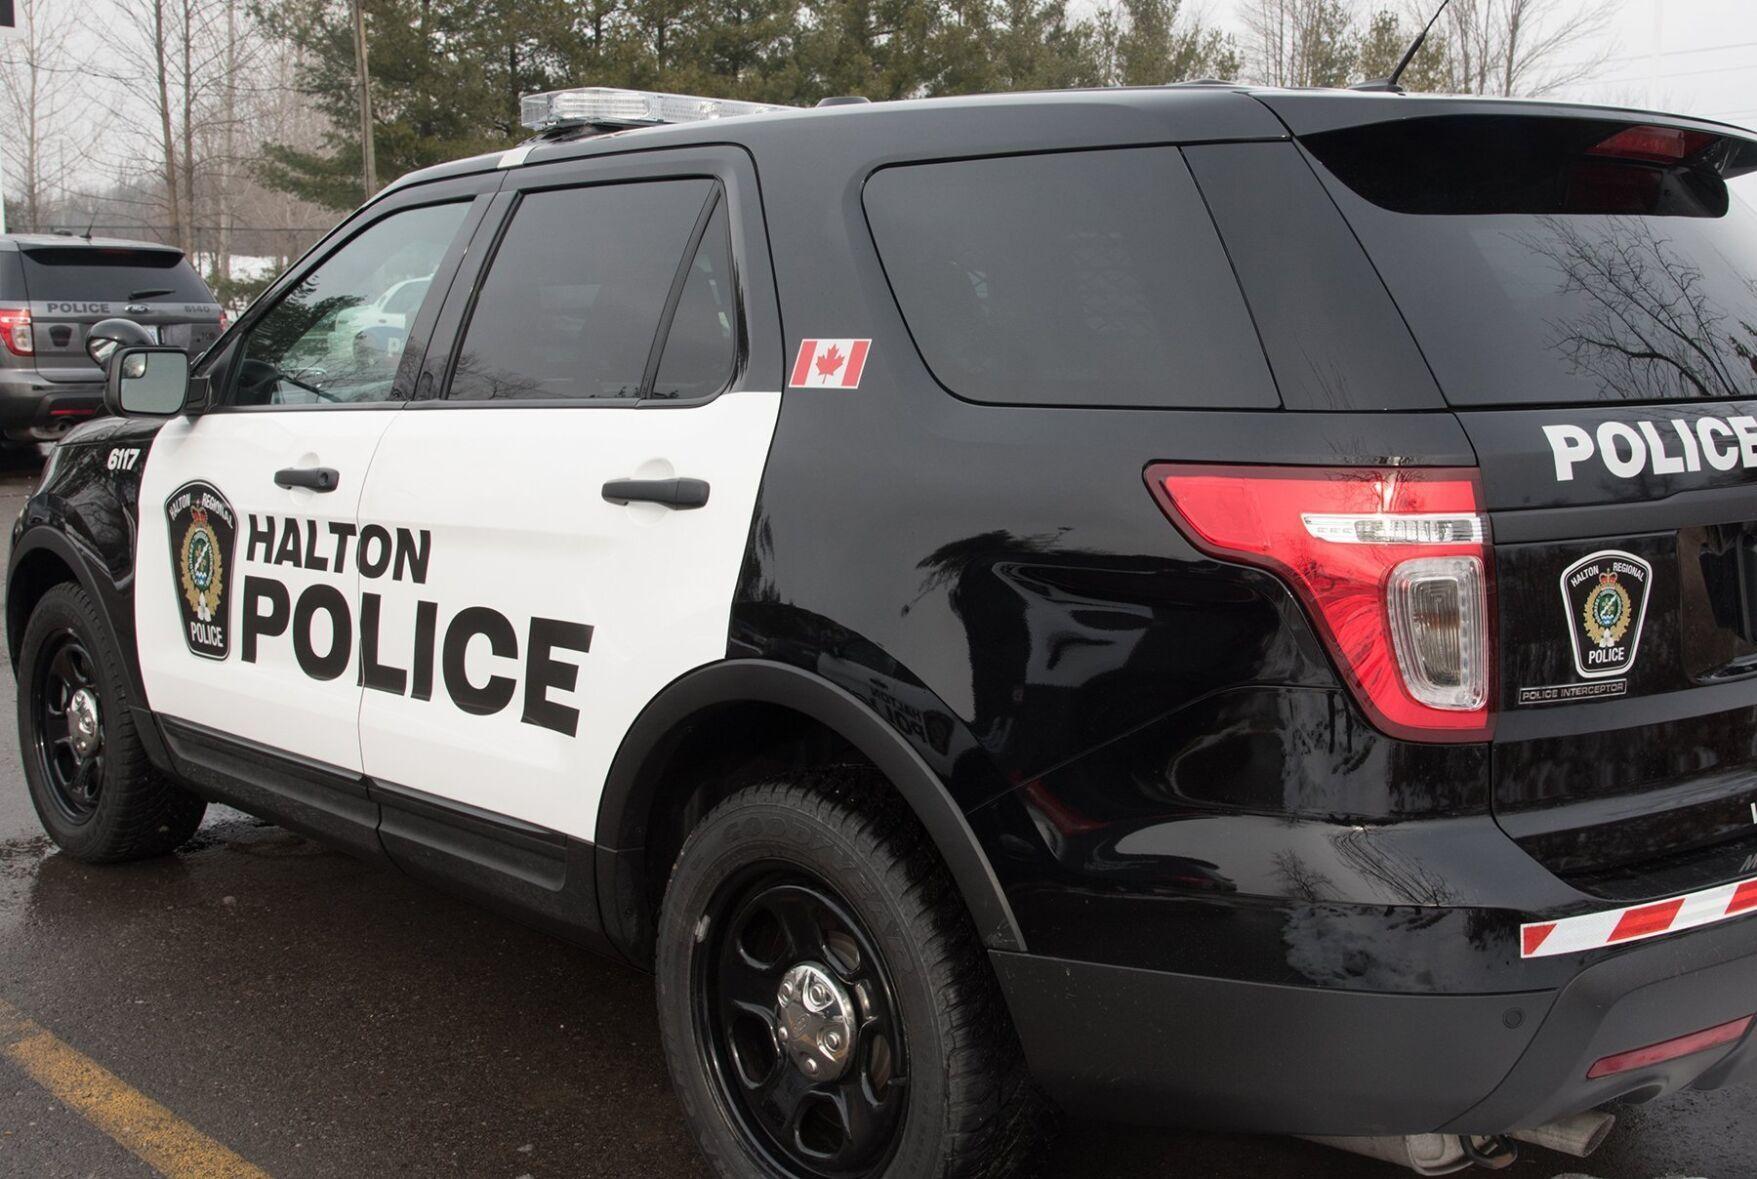 Store at Toronto Premium Outlets in Halton Hills closed after man pepper  sprayed